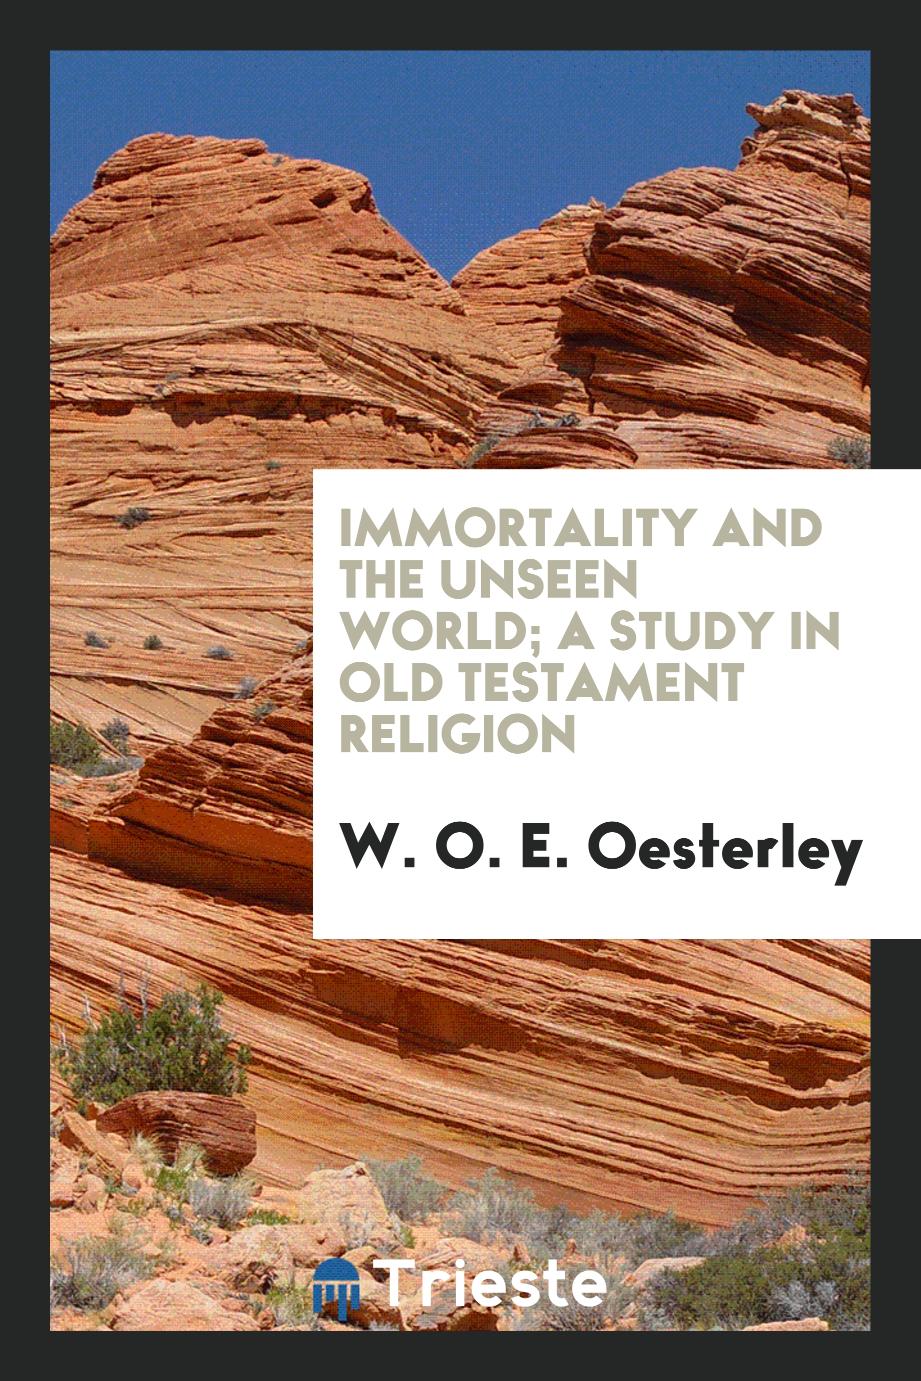 Immortality and the unseen world; a study in Old Testament religion